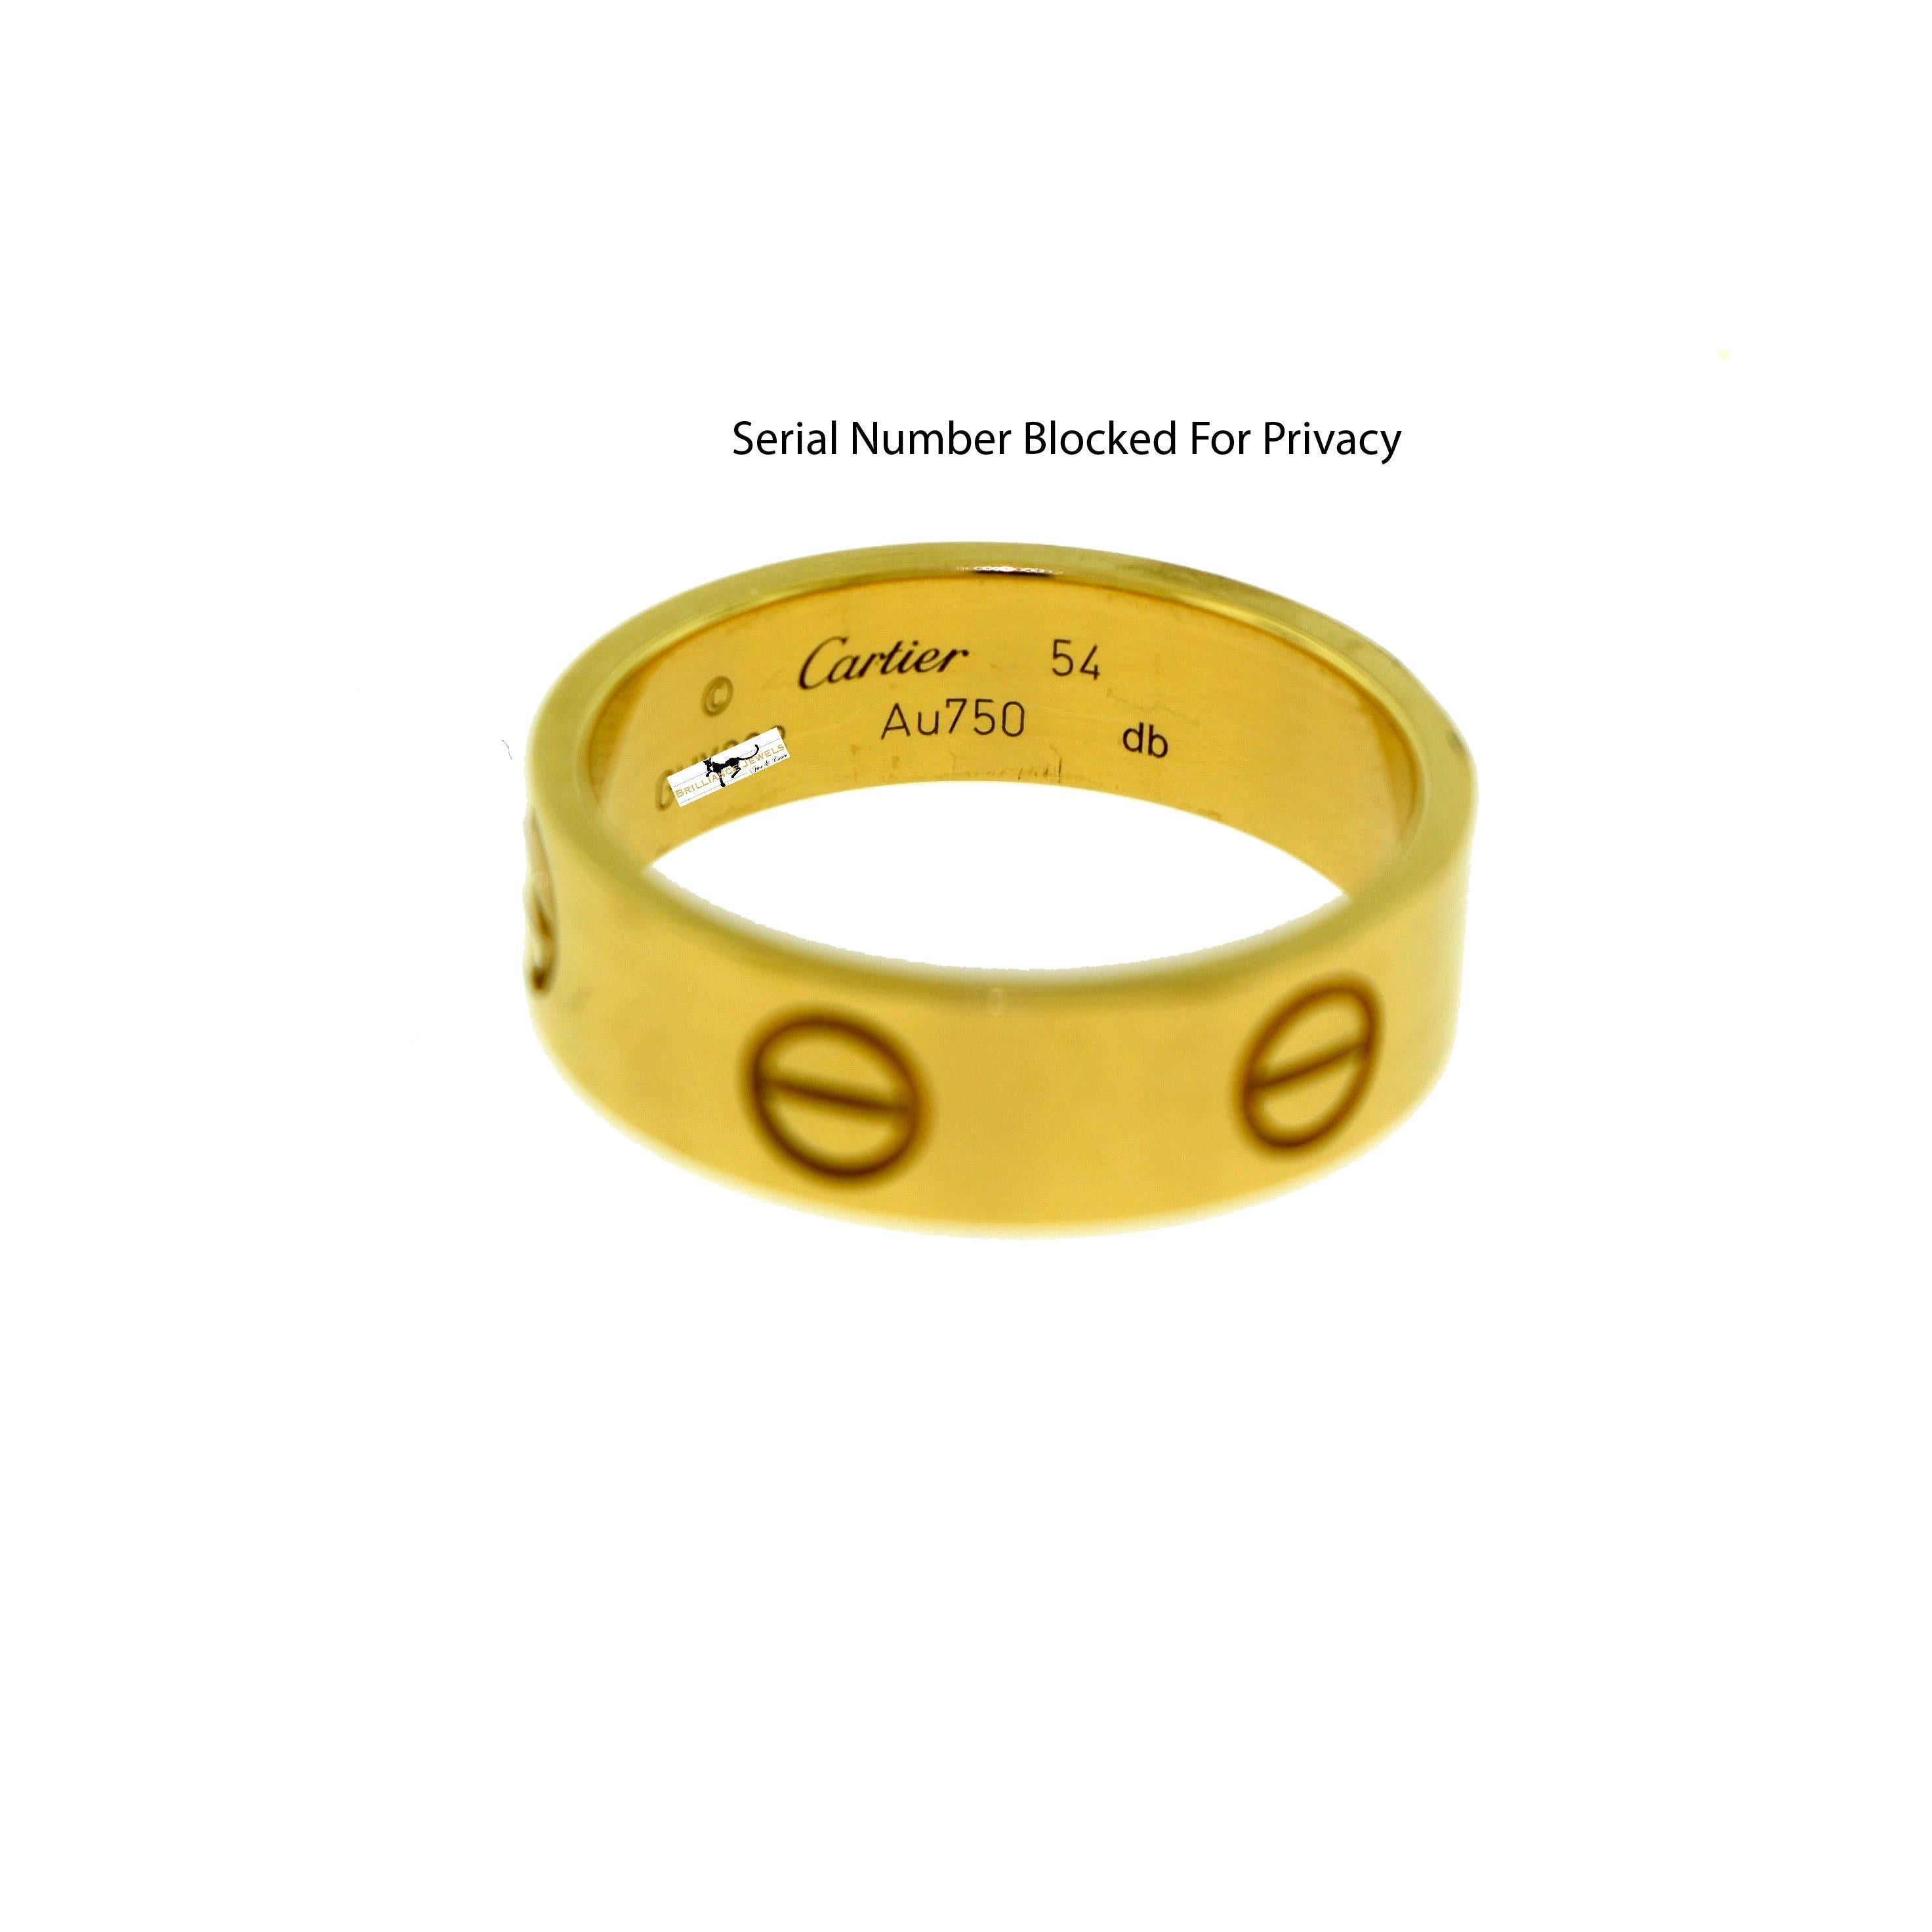 Brilliance Jewels, Miami
Questions? Call Us Anytime!
786,482,8100

Ring Size: 54 (euro) ; 6.75 (US)

Designer: Cartier

Collection: LOVE

Style: Band Ring

Metal: Yellow Gold

Metal Purity: 18k

Band Width: 5.53 mm

Total Item Weight (grams):